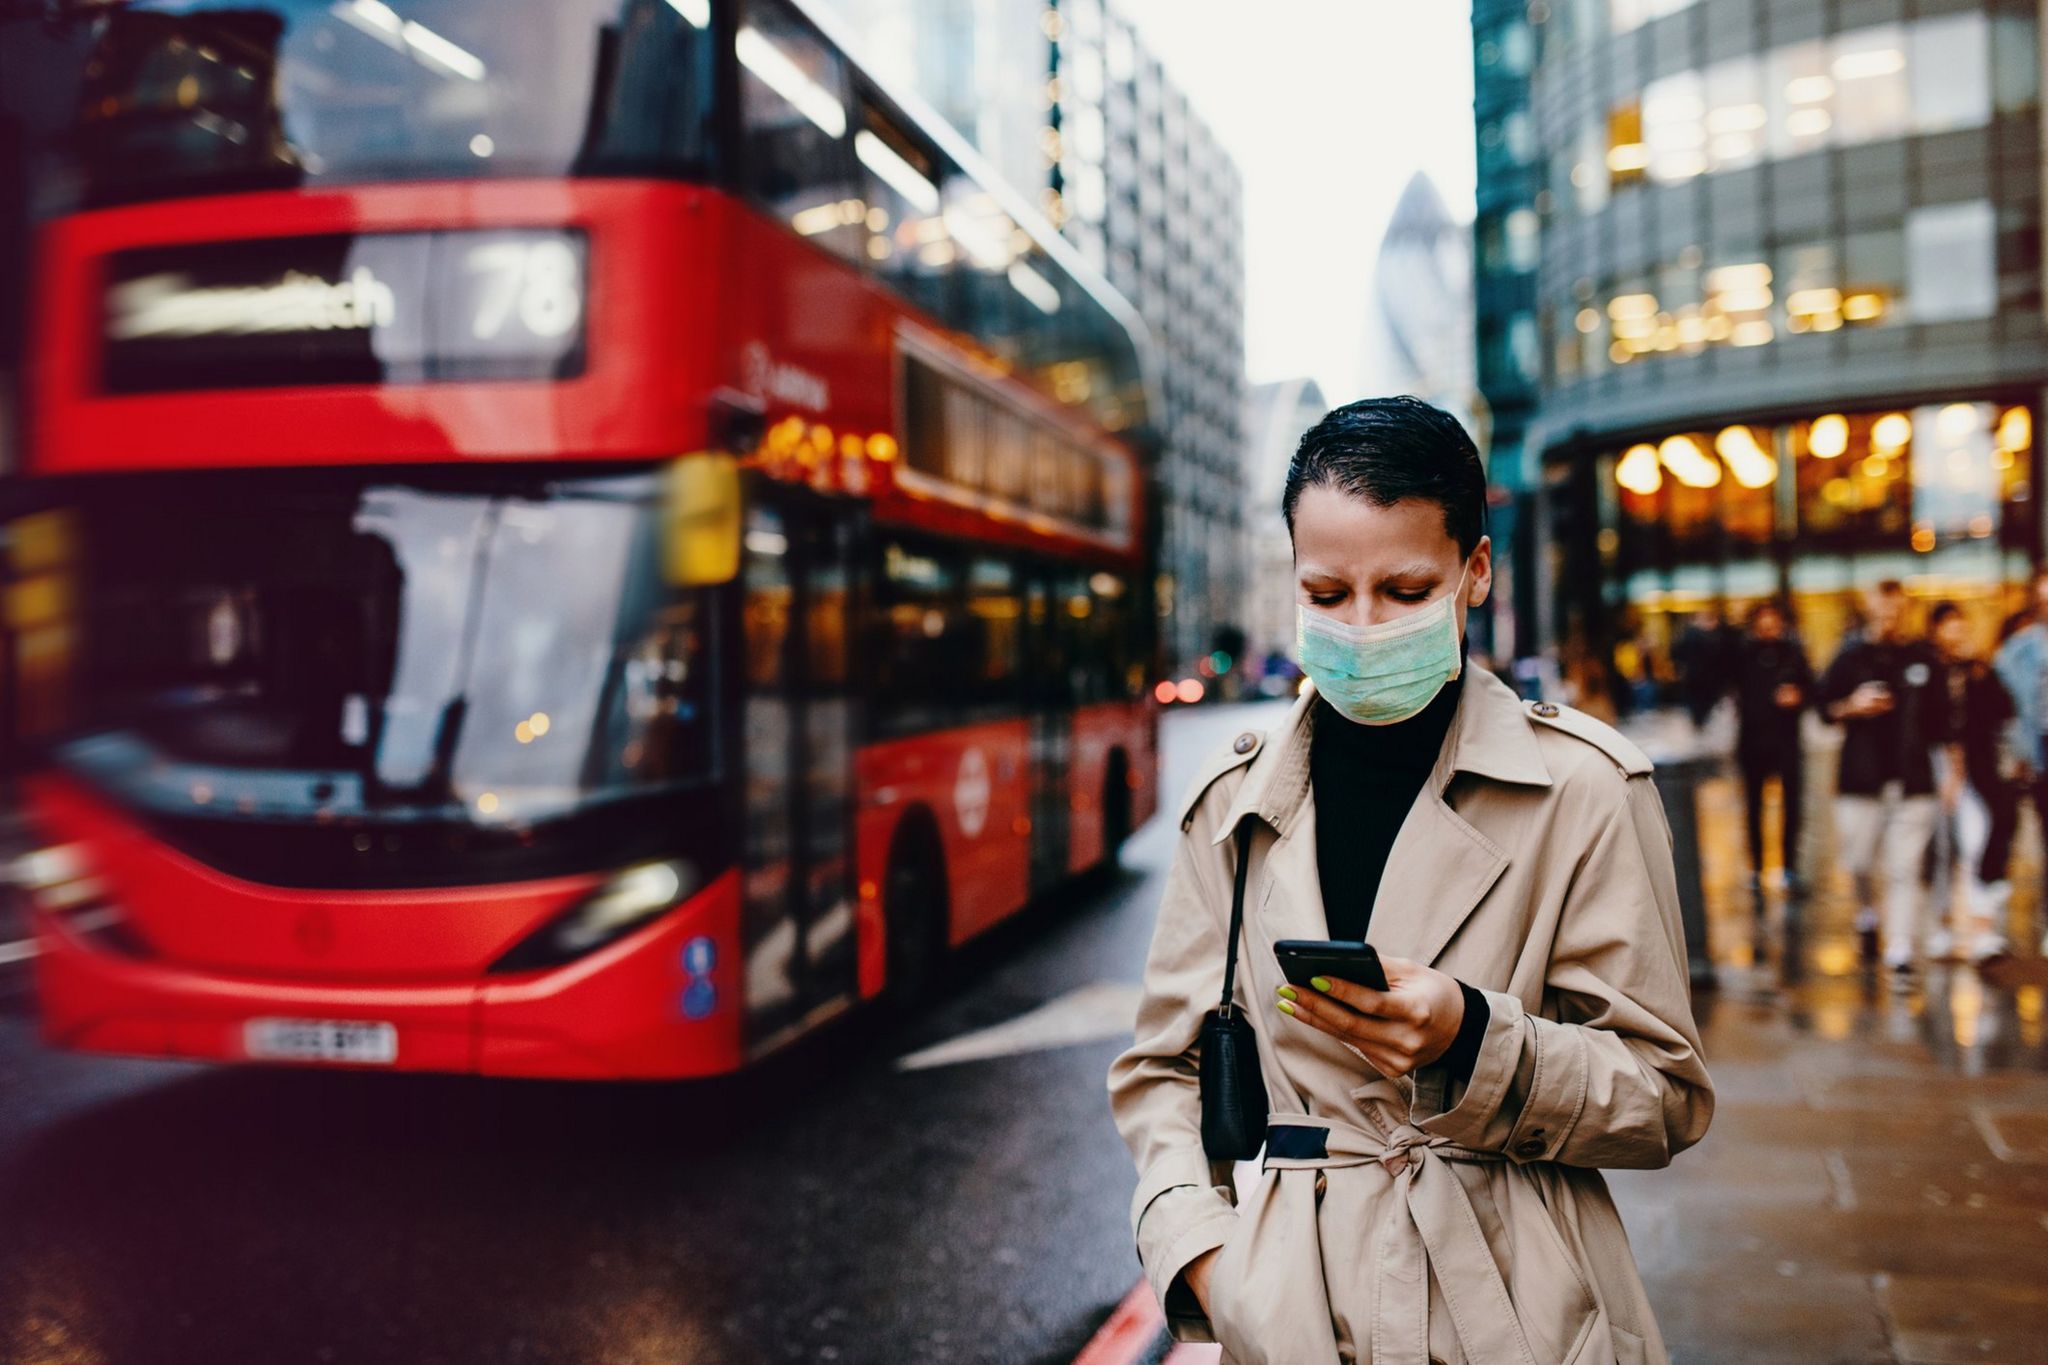 Woman waits by London bus stop in facemask